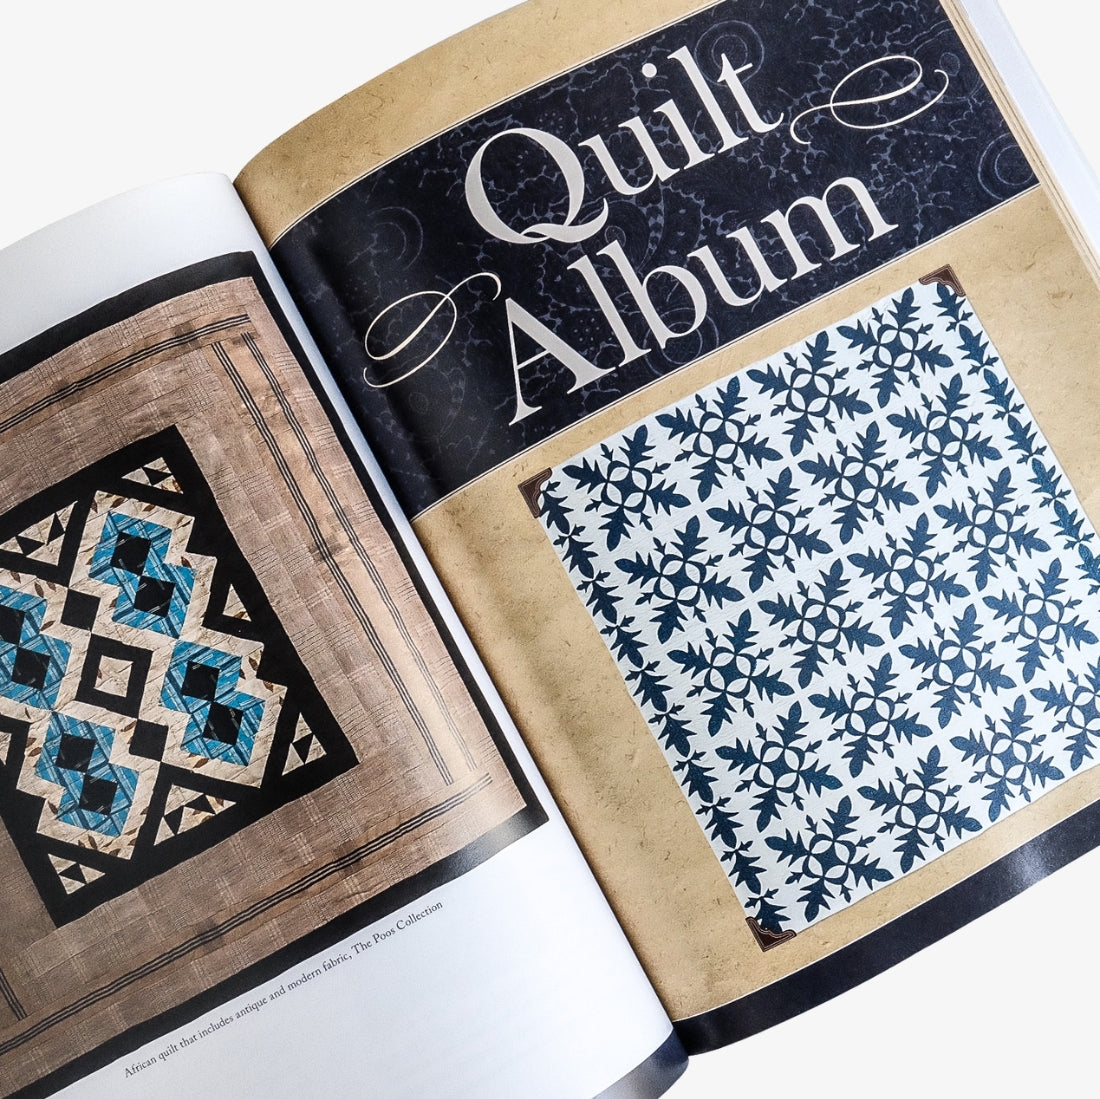 Indigo Quilts: 30 Quilts from the Poos Collection by Kay and Lori Lee Triplett